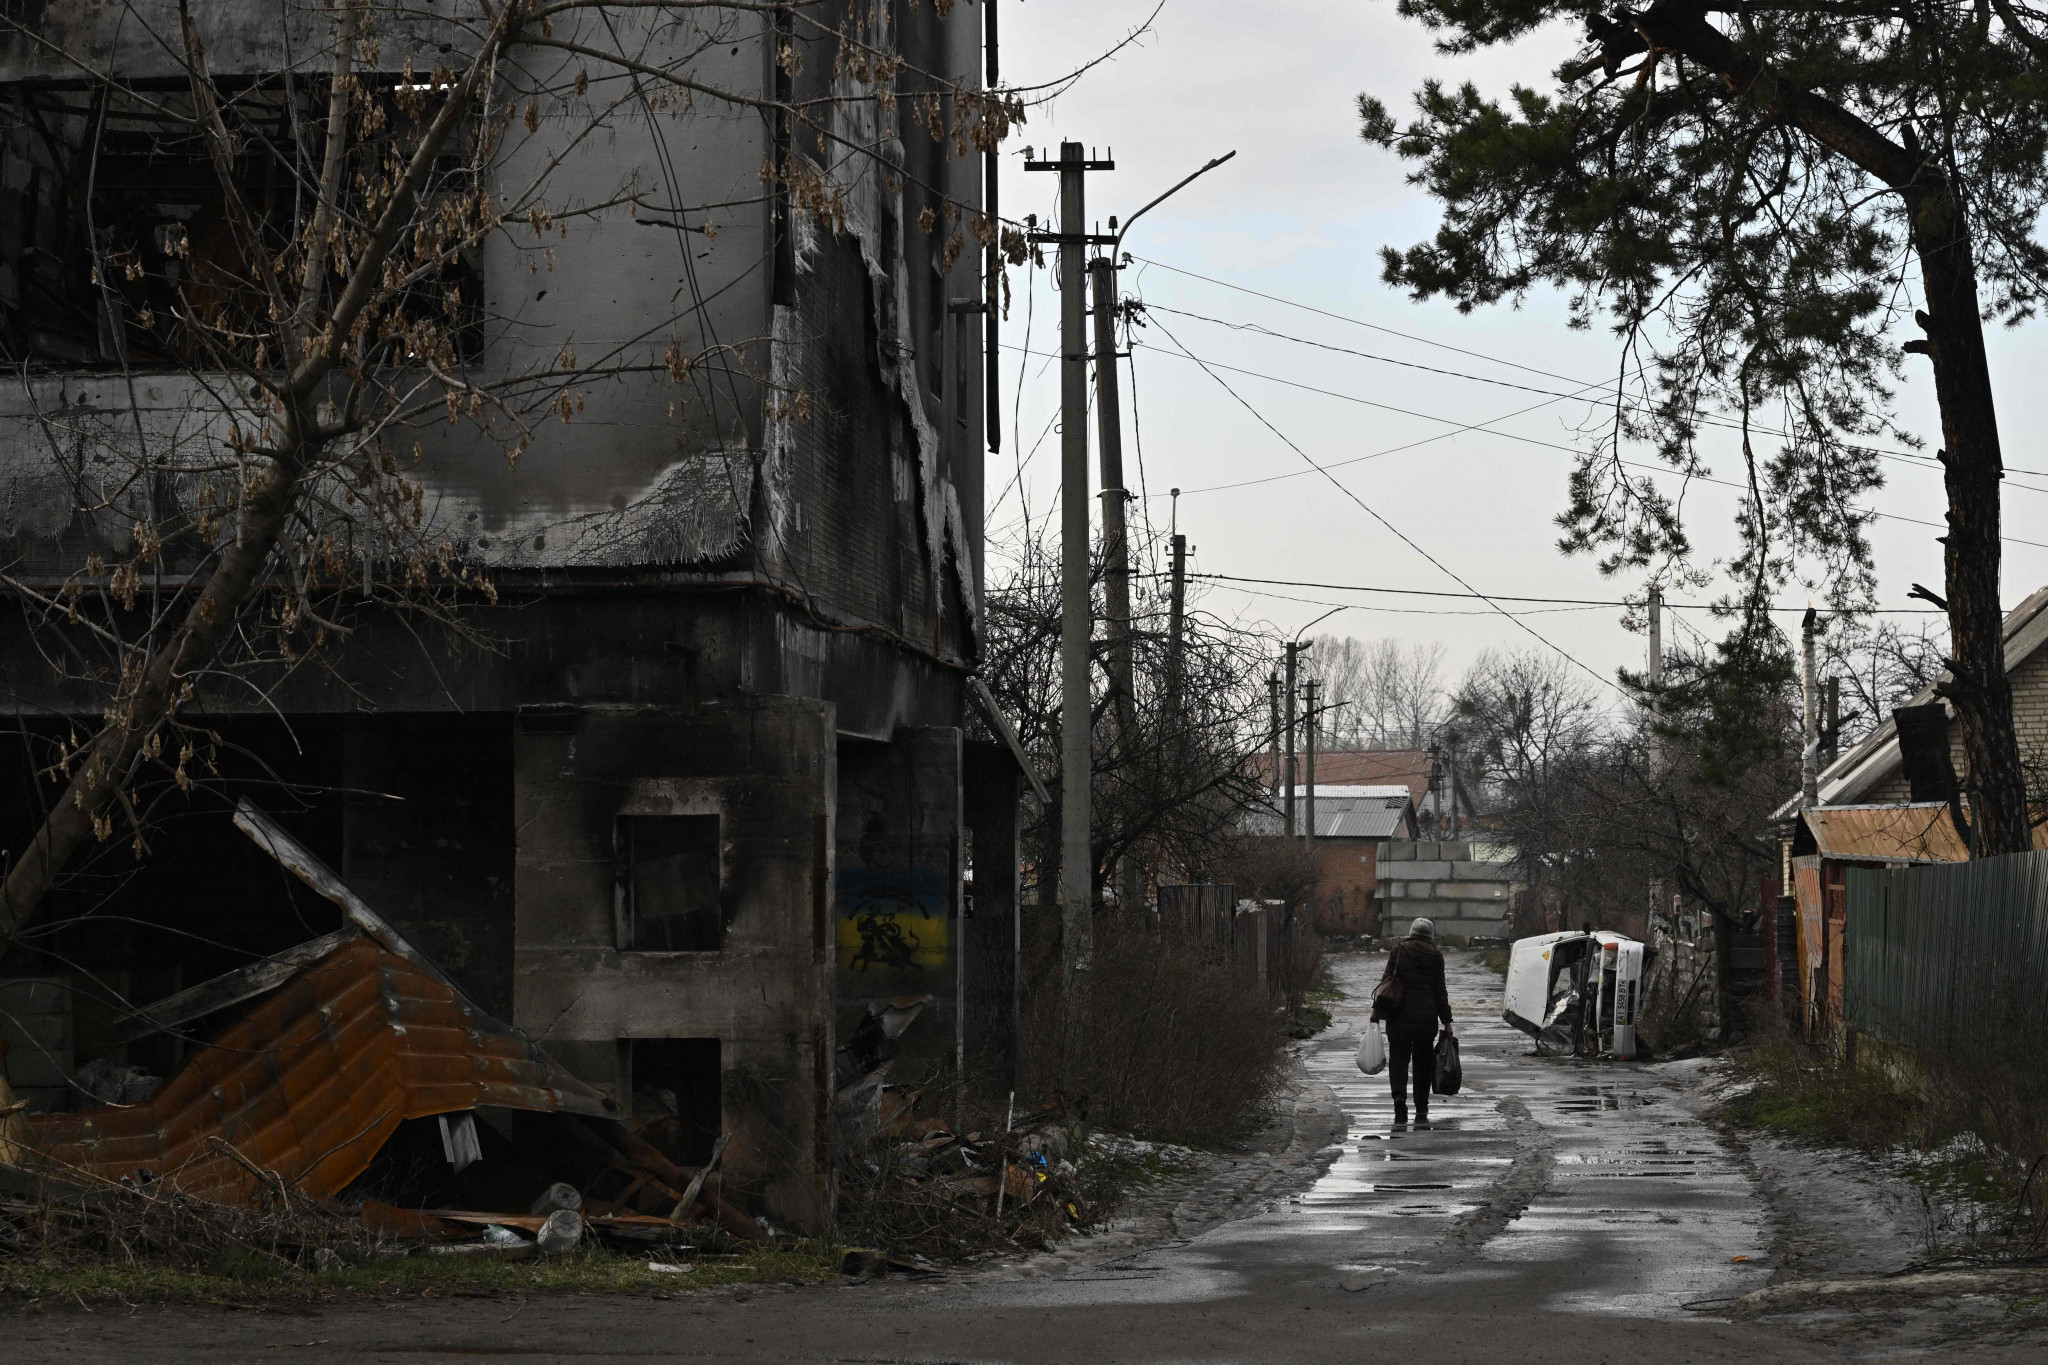 Yaroslav Amosov helped Ukrainian troops recapture his home city of Irpin from Russian occupation last March ©Getty Images